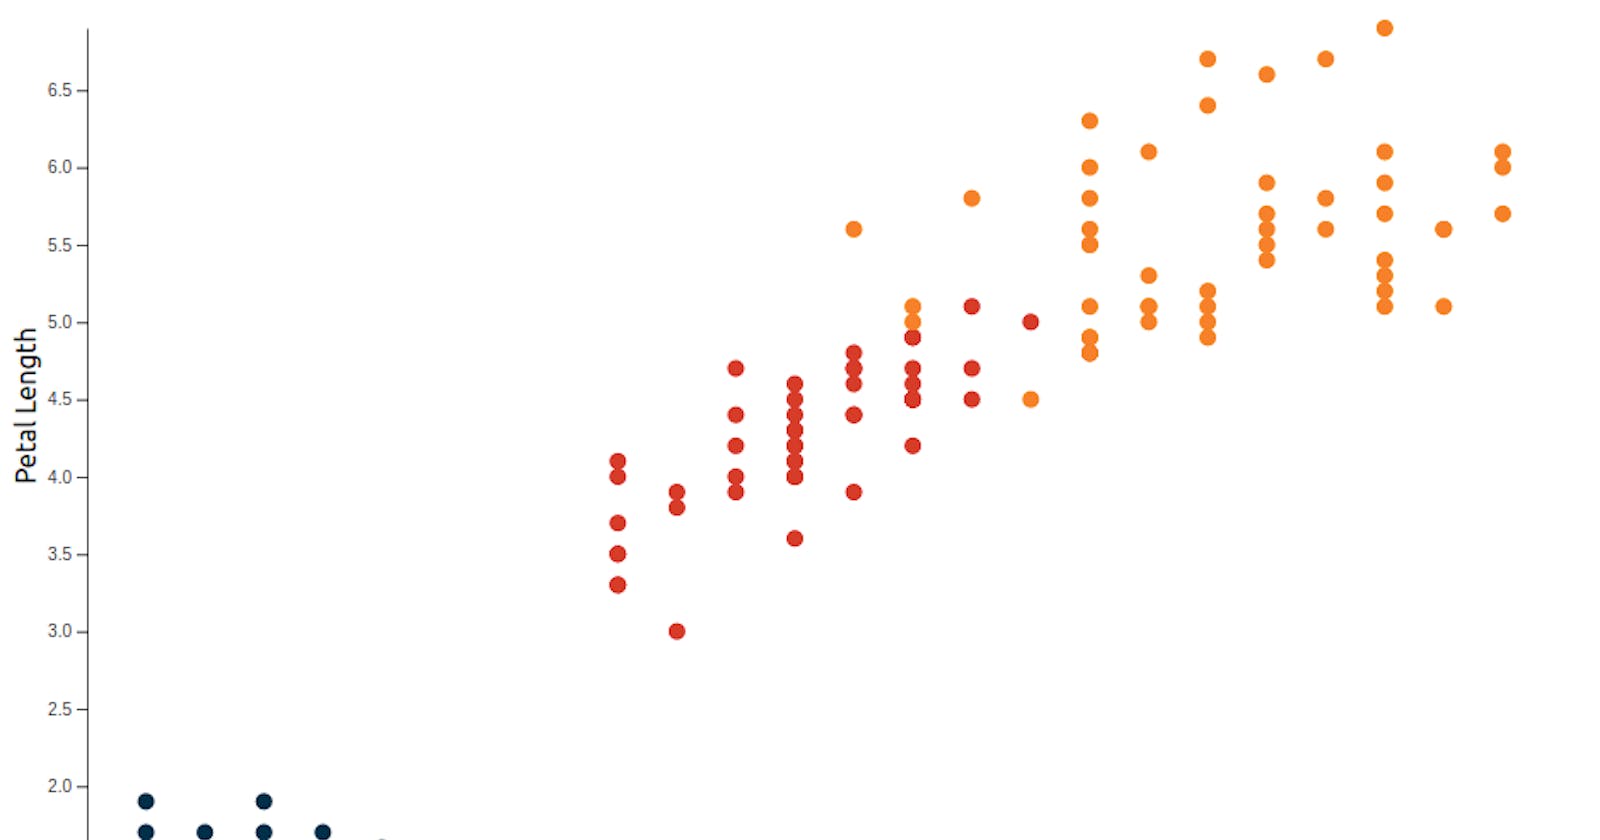 Make a scatter plot with Svelte and D3